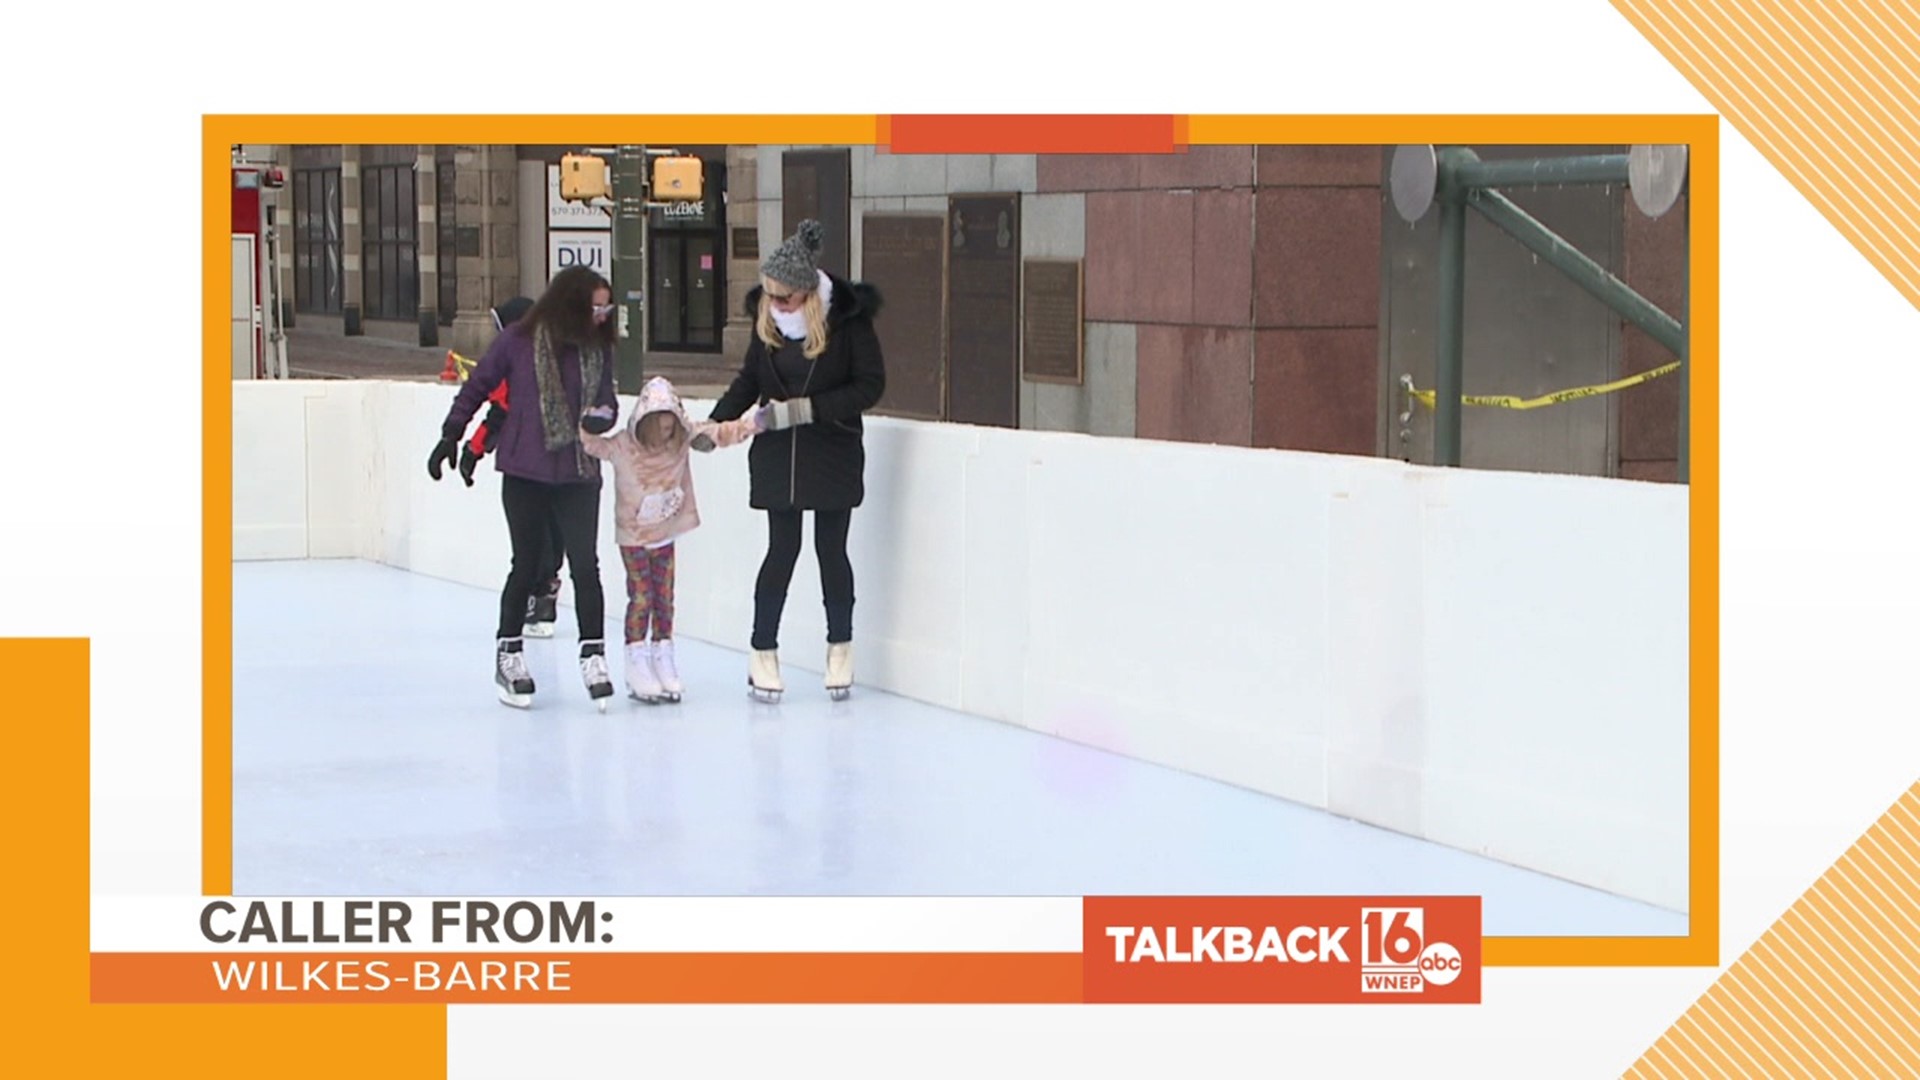 Wilkes-Barre's new downtown skating rink has been a talker on Talkback 16 all week long.